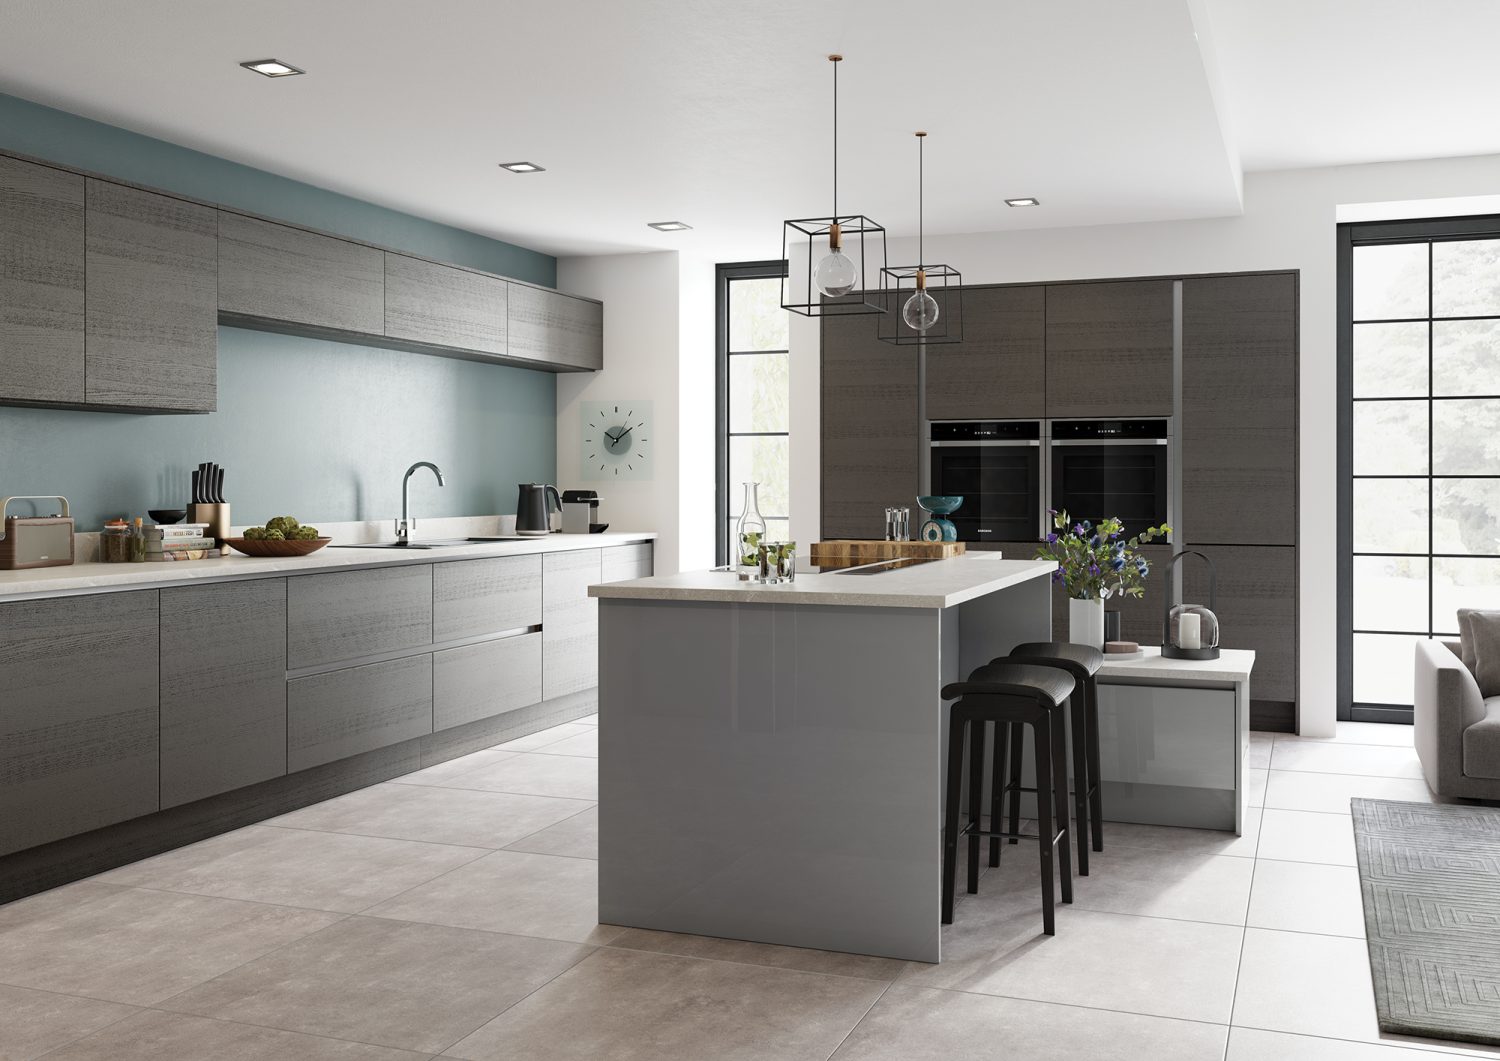 Zara Gloss Dust Grey Kitchen with white worktop, two tall oven units and a kitchen island. Designed by the kitchen depot. The Kitchen view is from the side of the island.